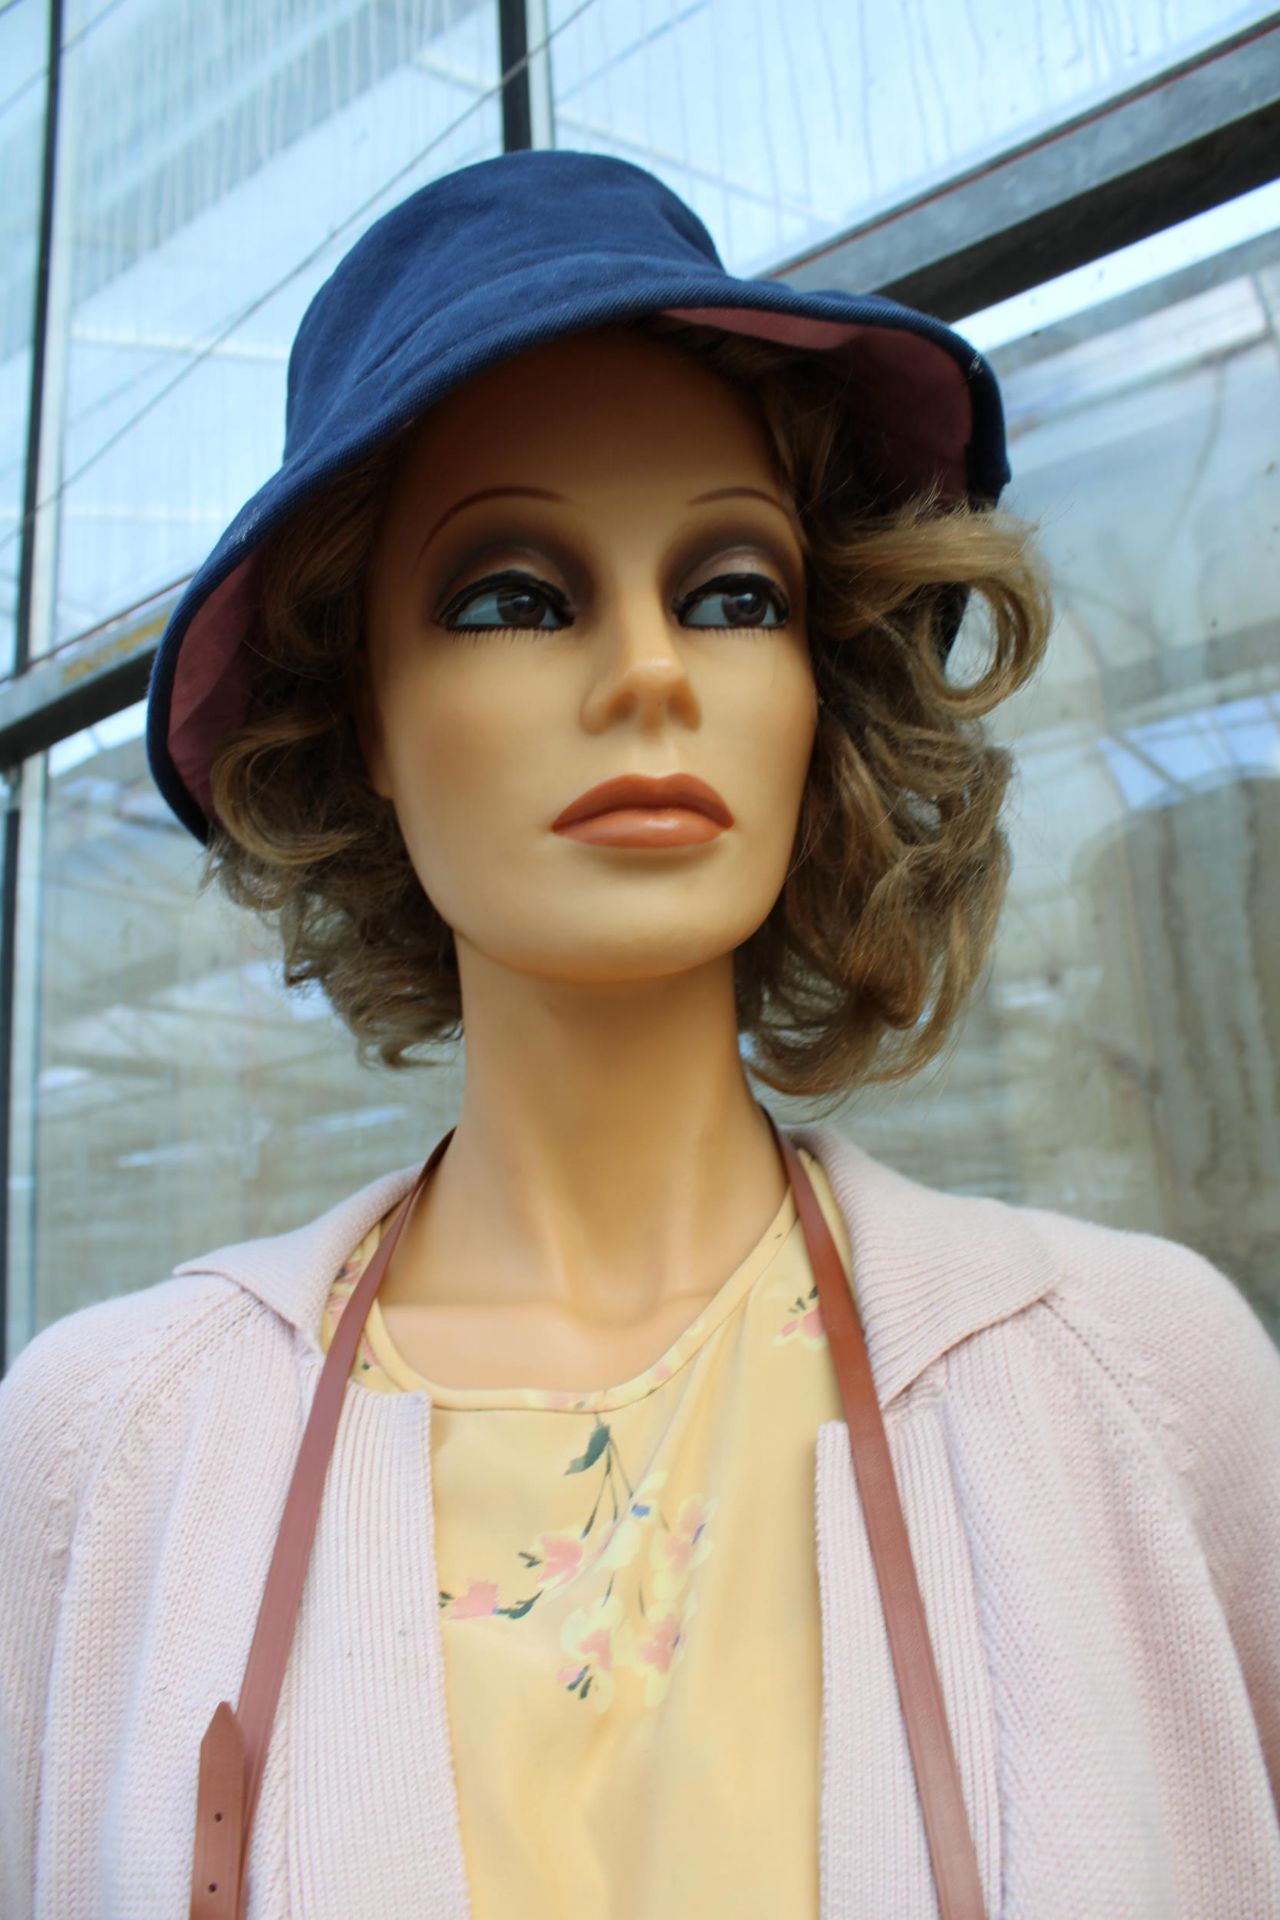 A FEMALE SHOP DISPLAY MANNEQUIN WITH STAND AND CLOTHING - Image 2 of 7